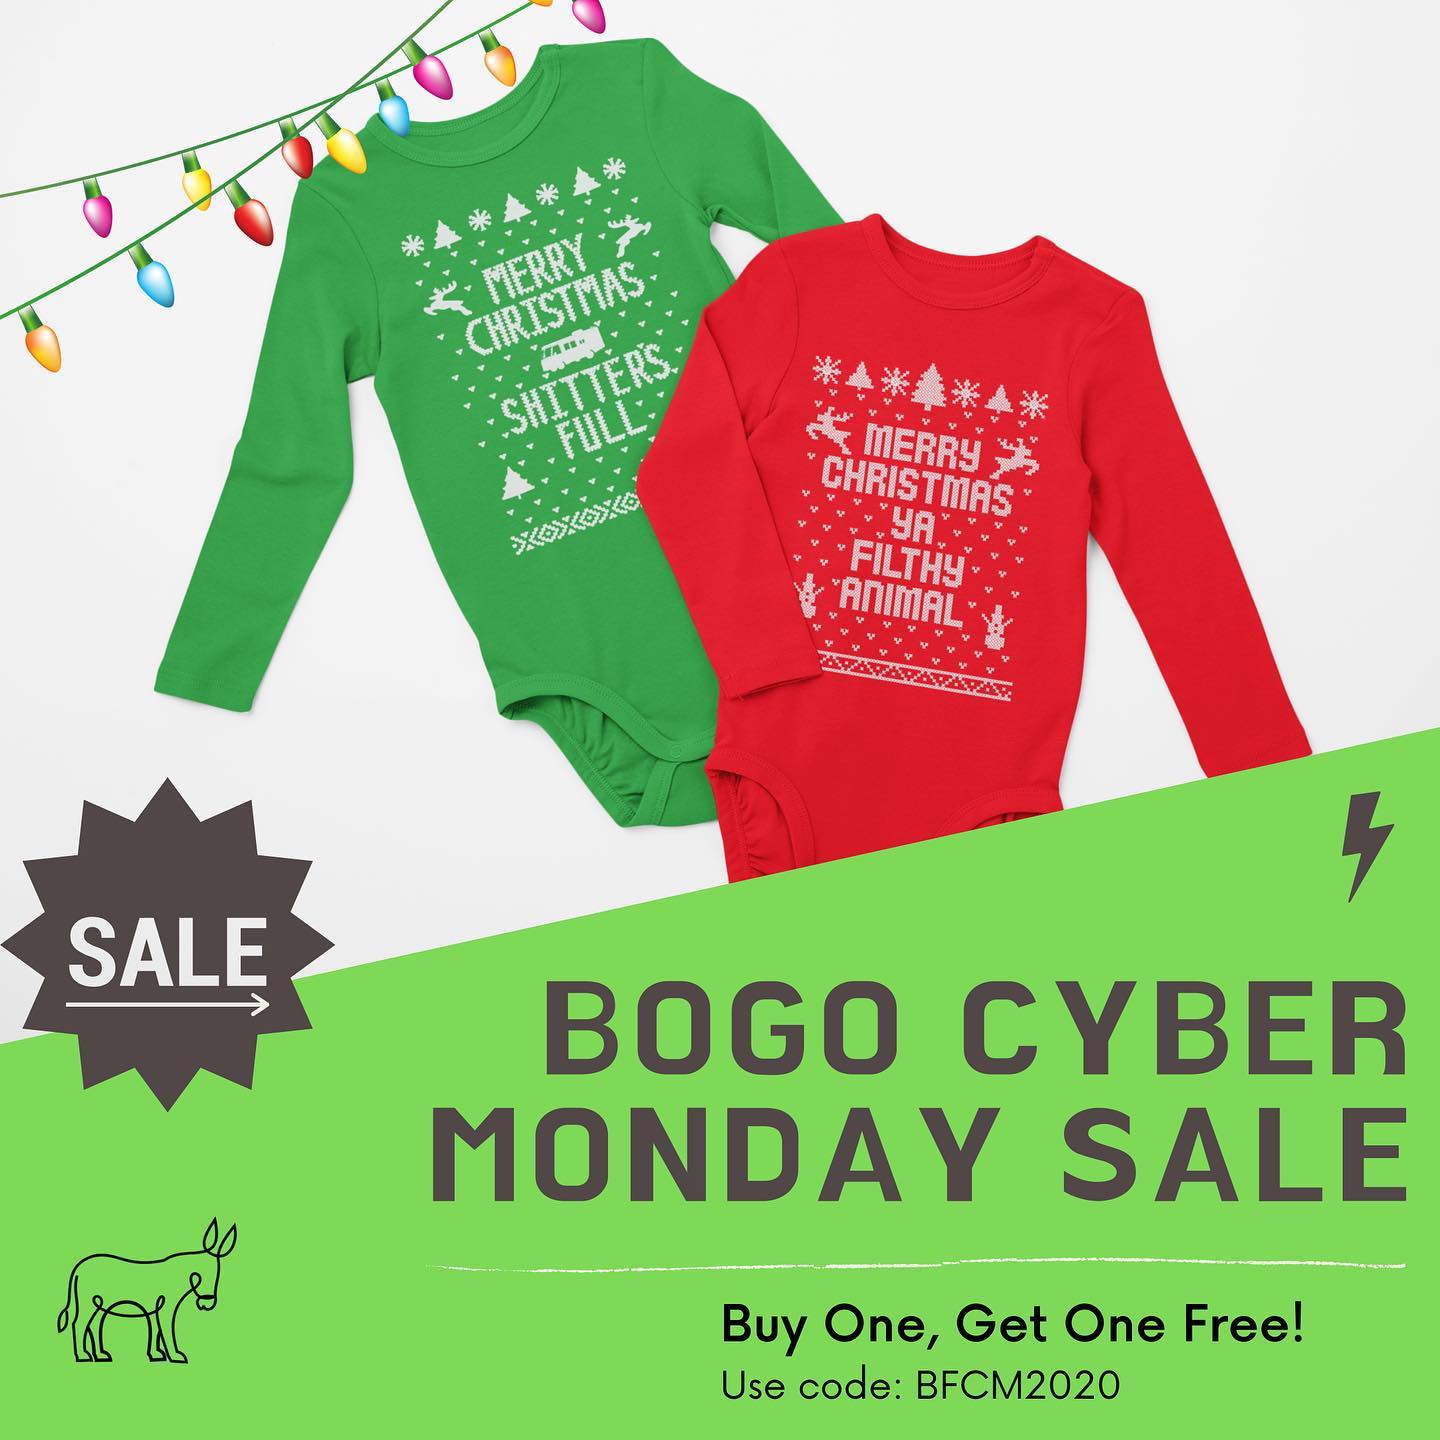 #CYBERMONDAY is happening which means... - Donkey Tees